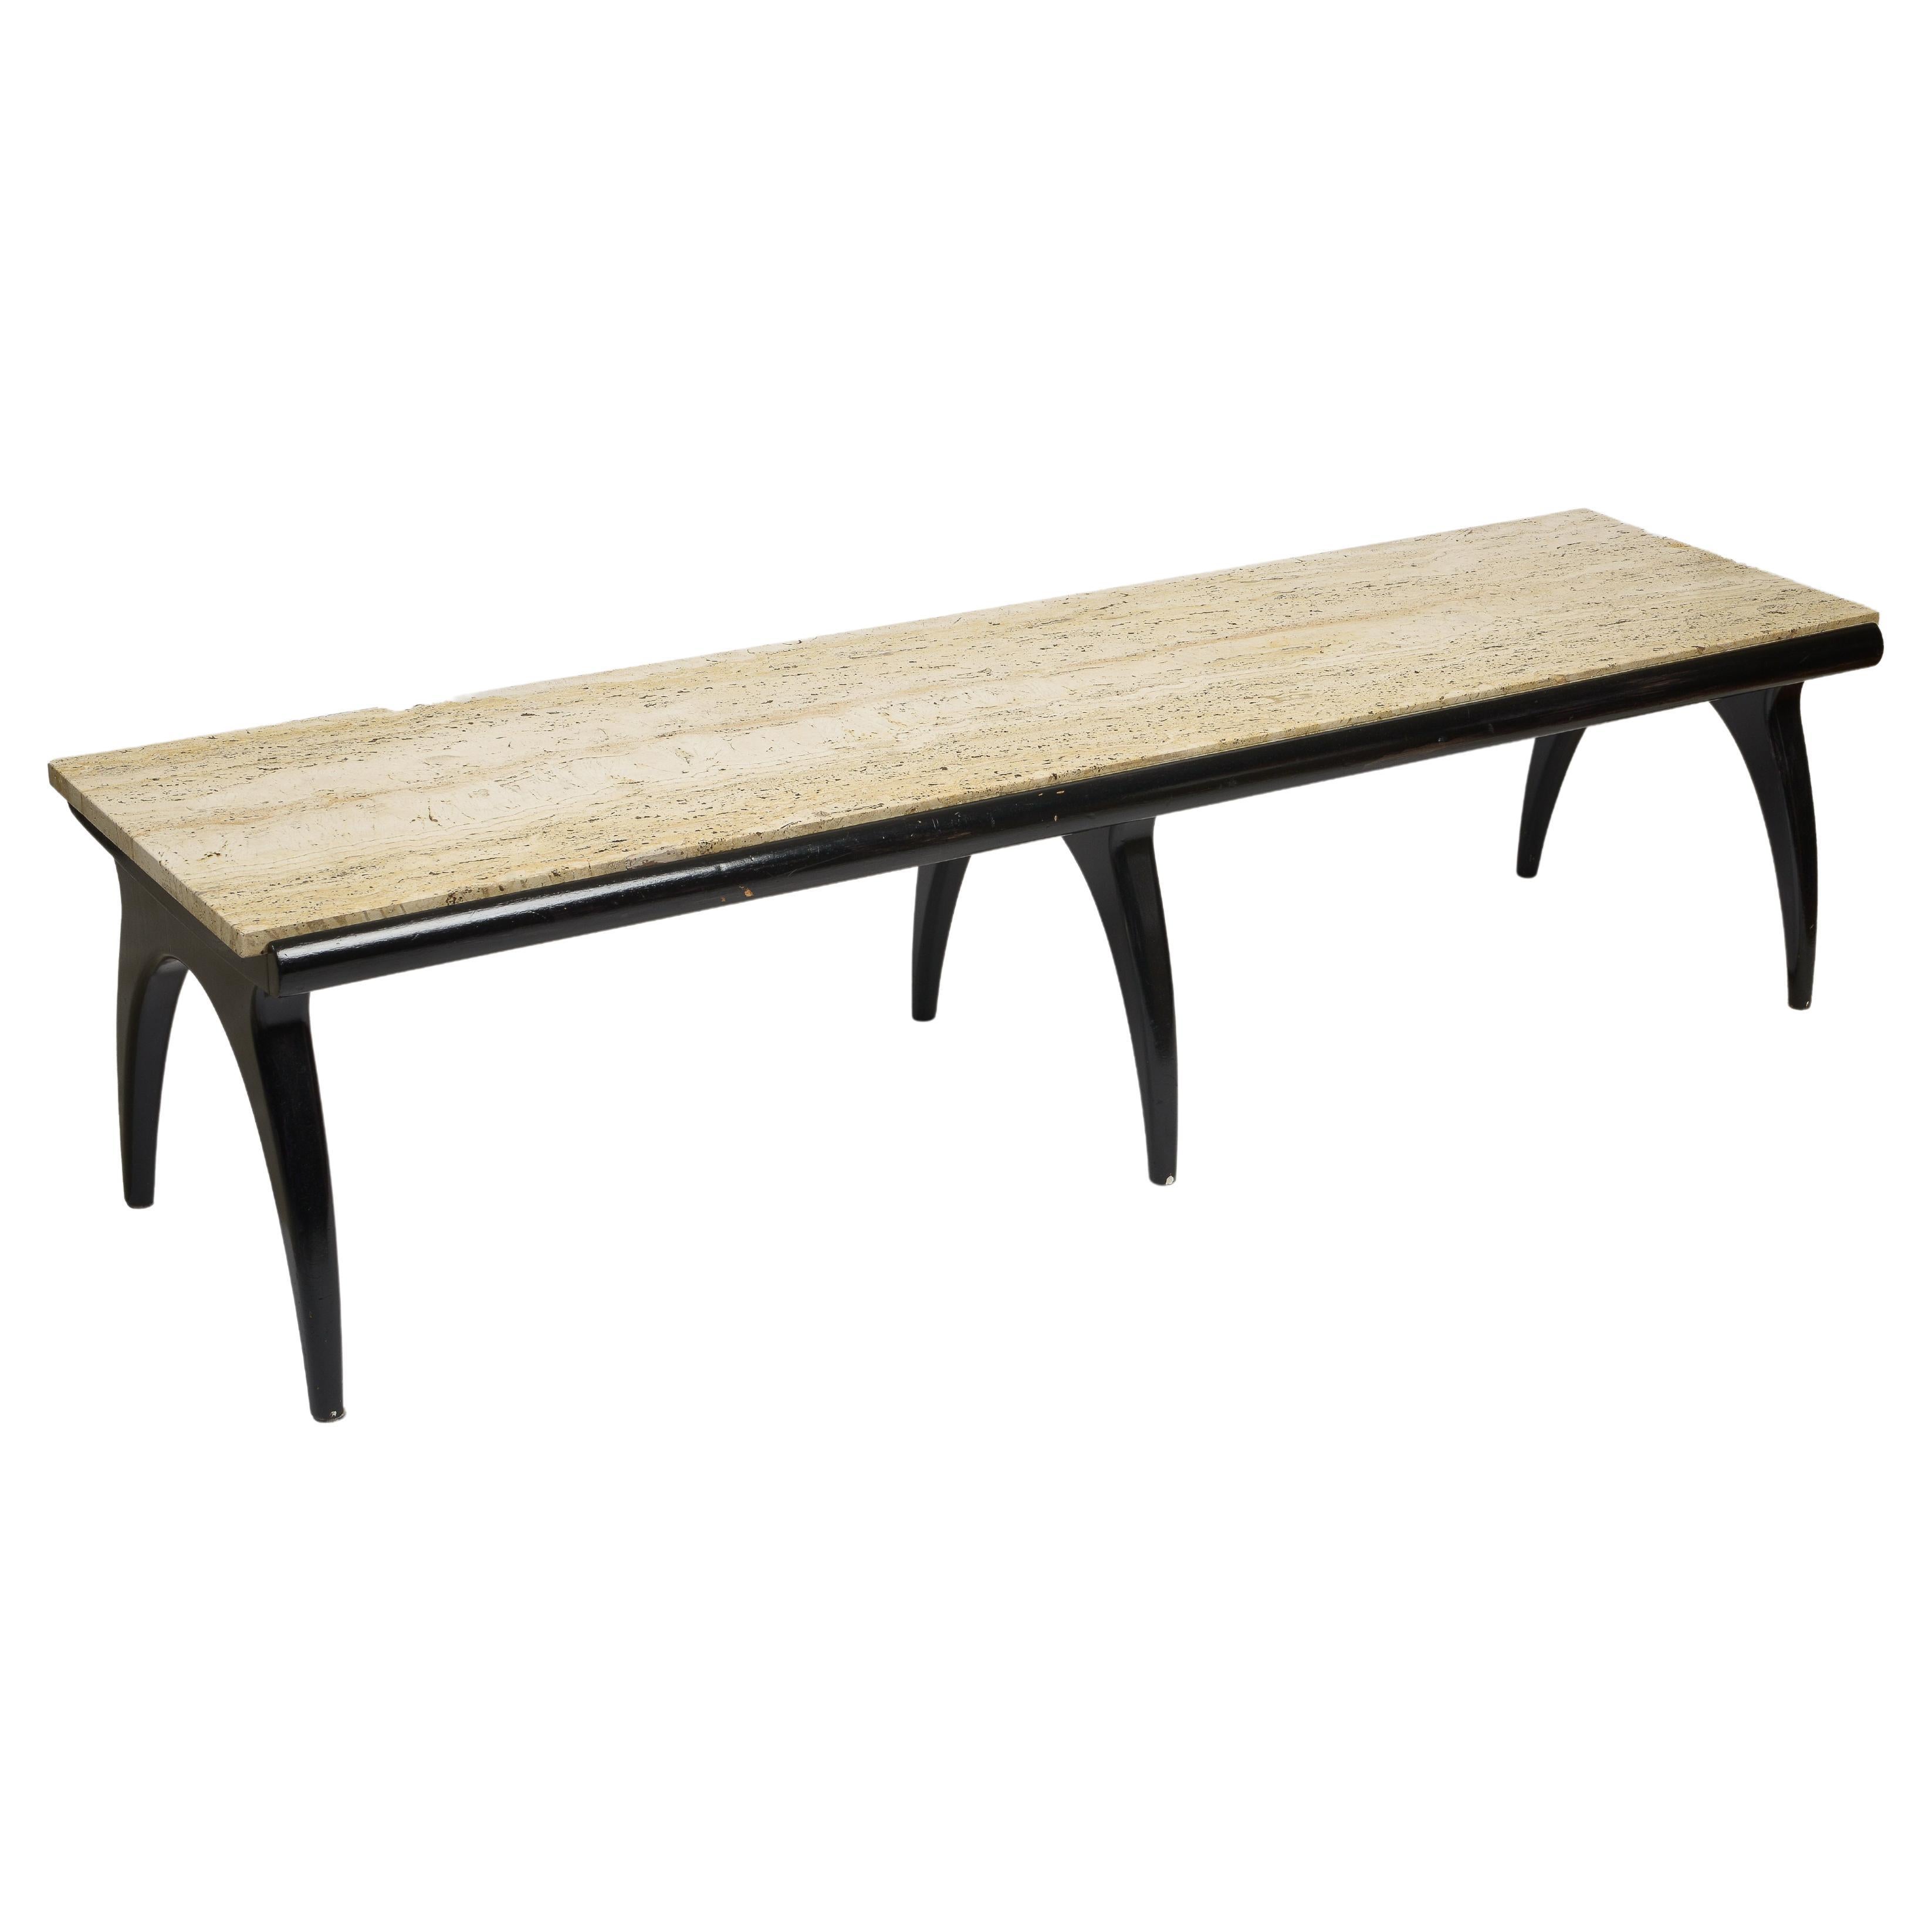 1950s Bertha Schaefer Travertine and black wood Coffee Table For Sale